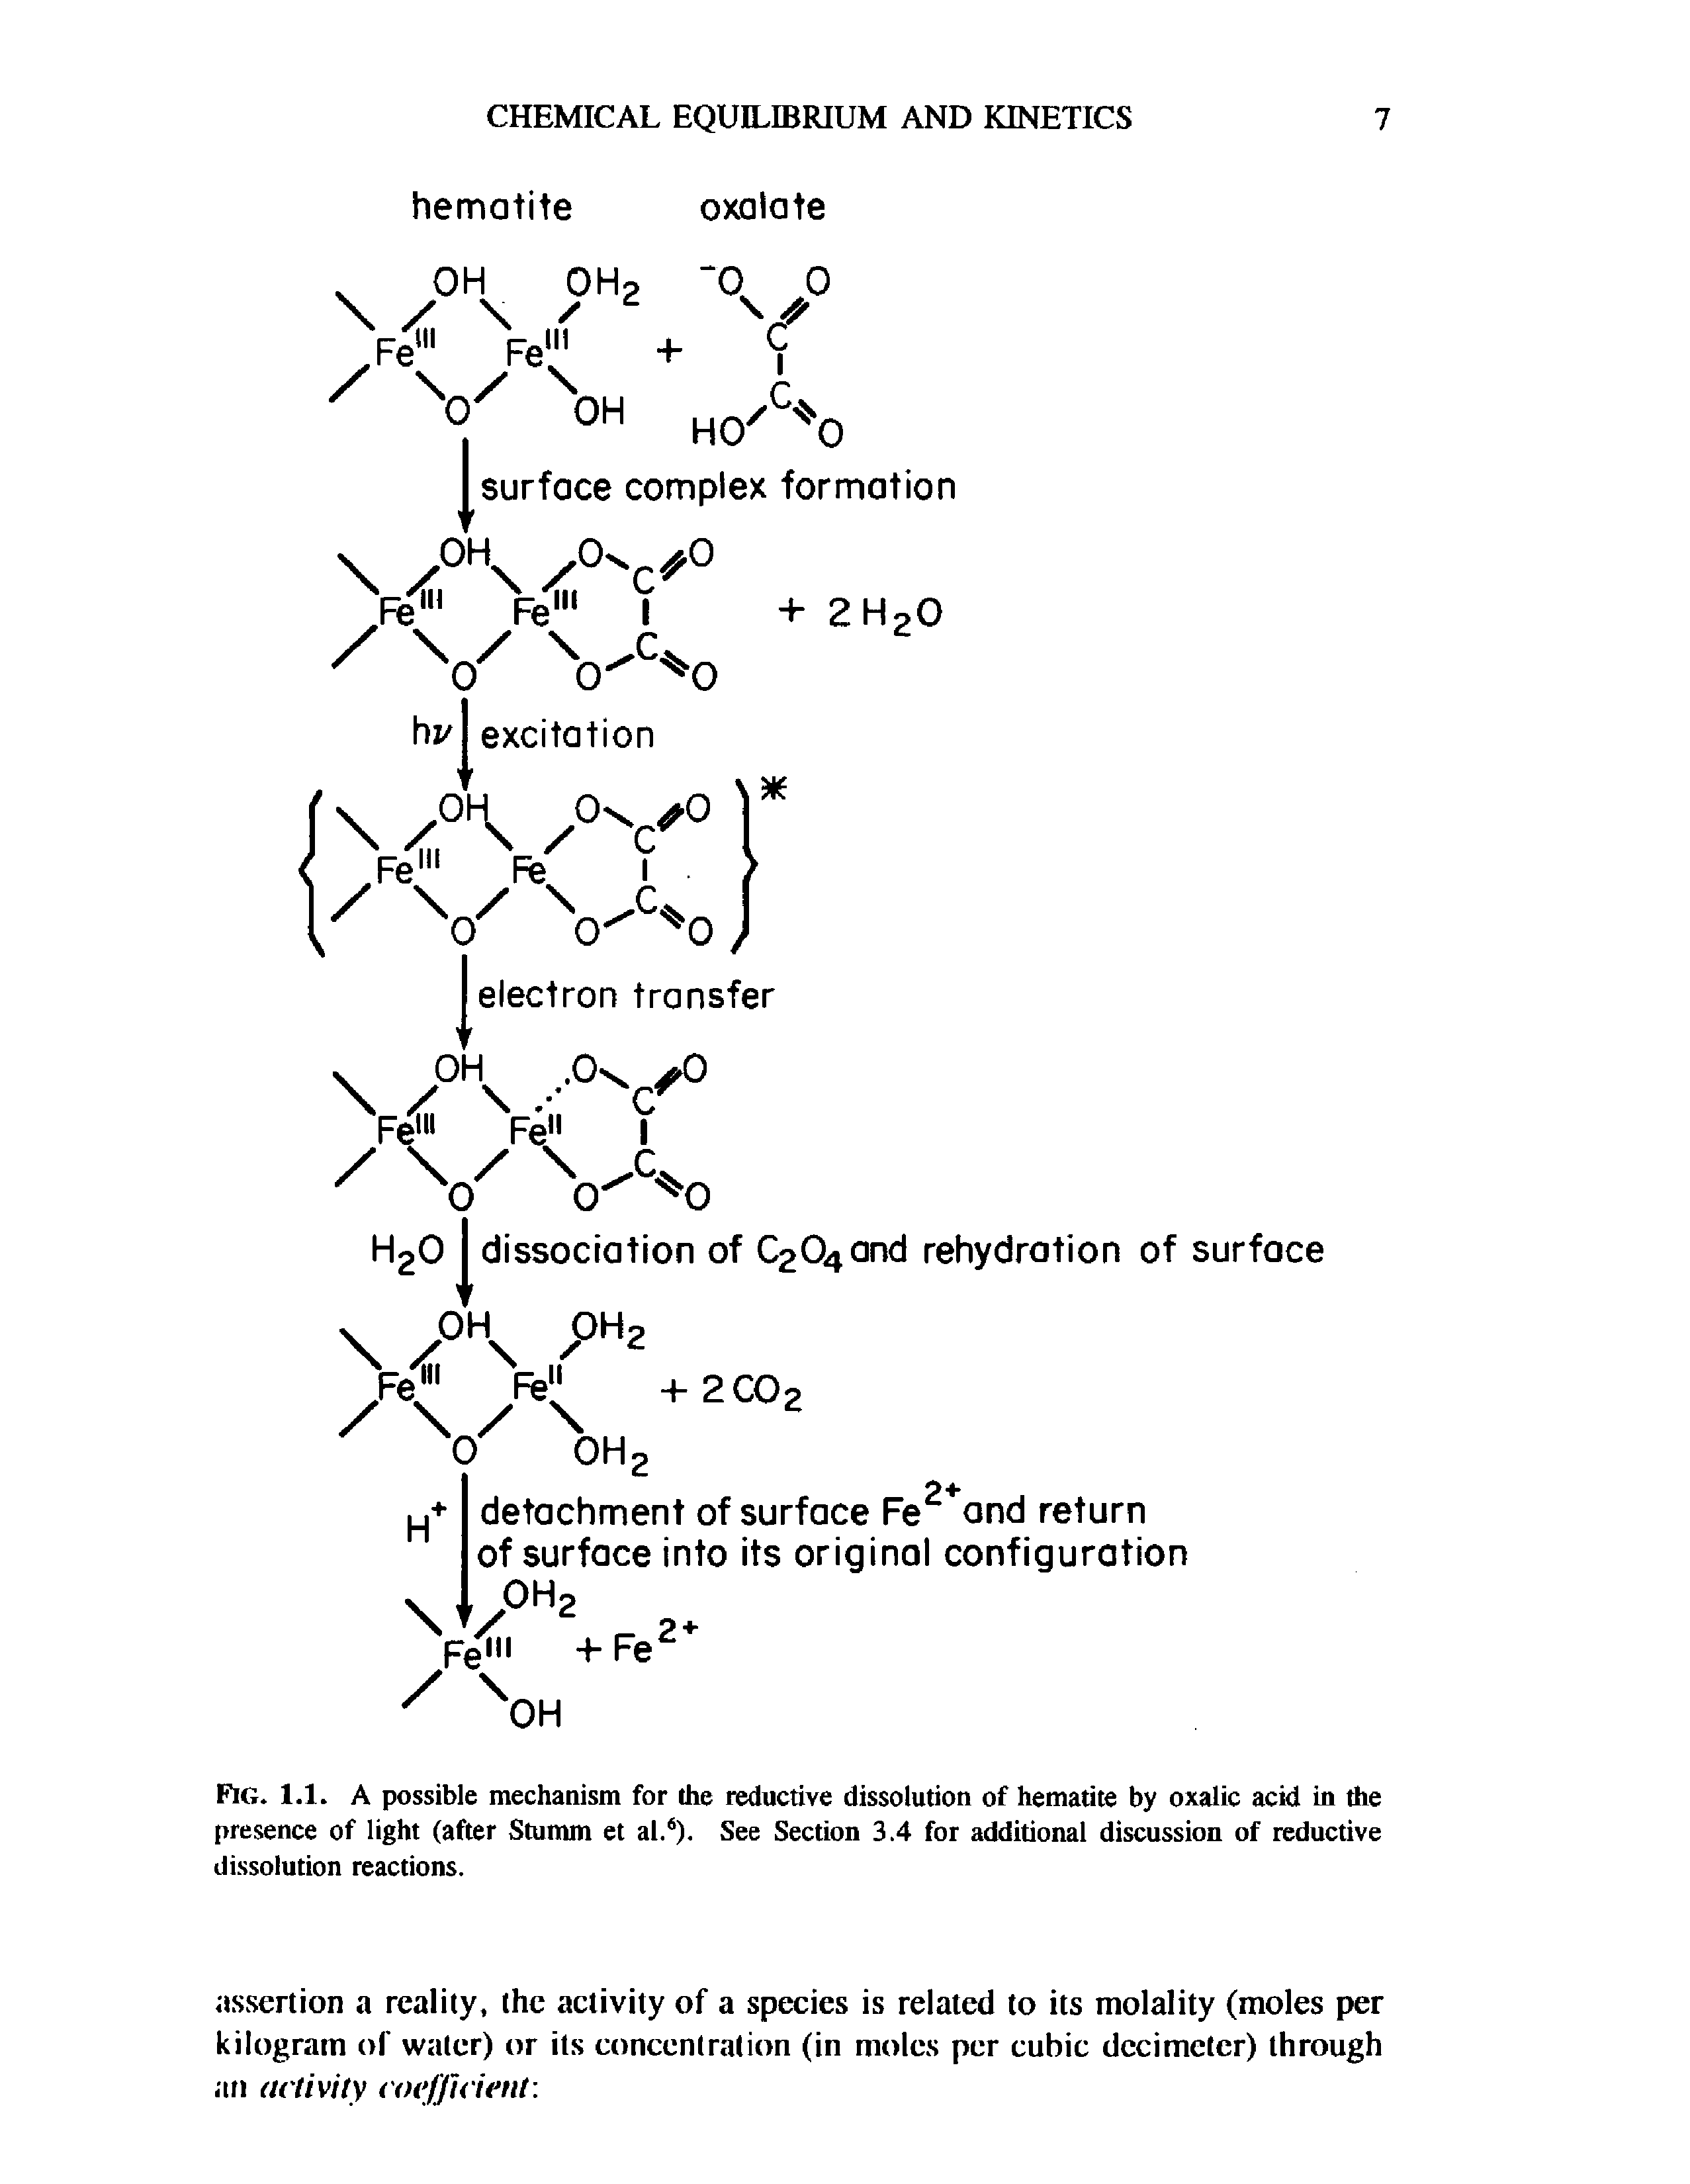 Fig. 1.1. A possible mechanism for (he reductive dissolution of hematite by oxalic acid in the presence of light (after Stumm et al.6). See Section 3.4 for additional discussion of reductive dissolution reactions.